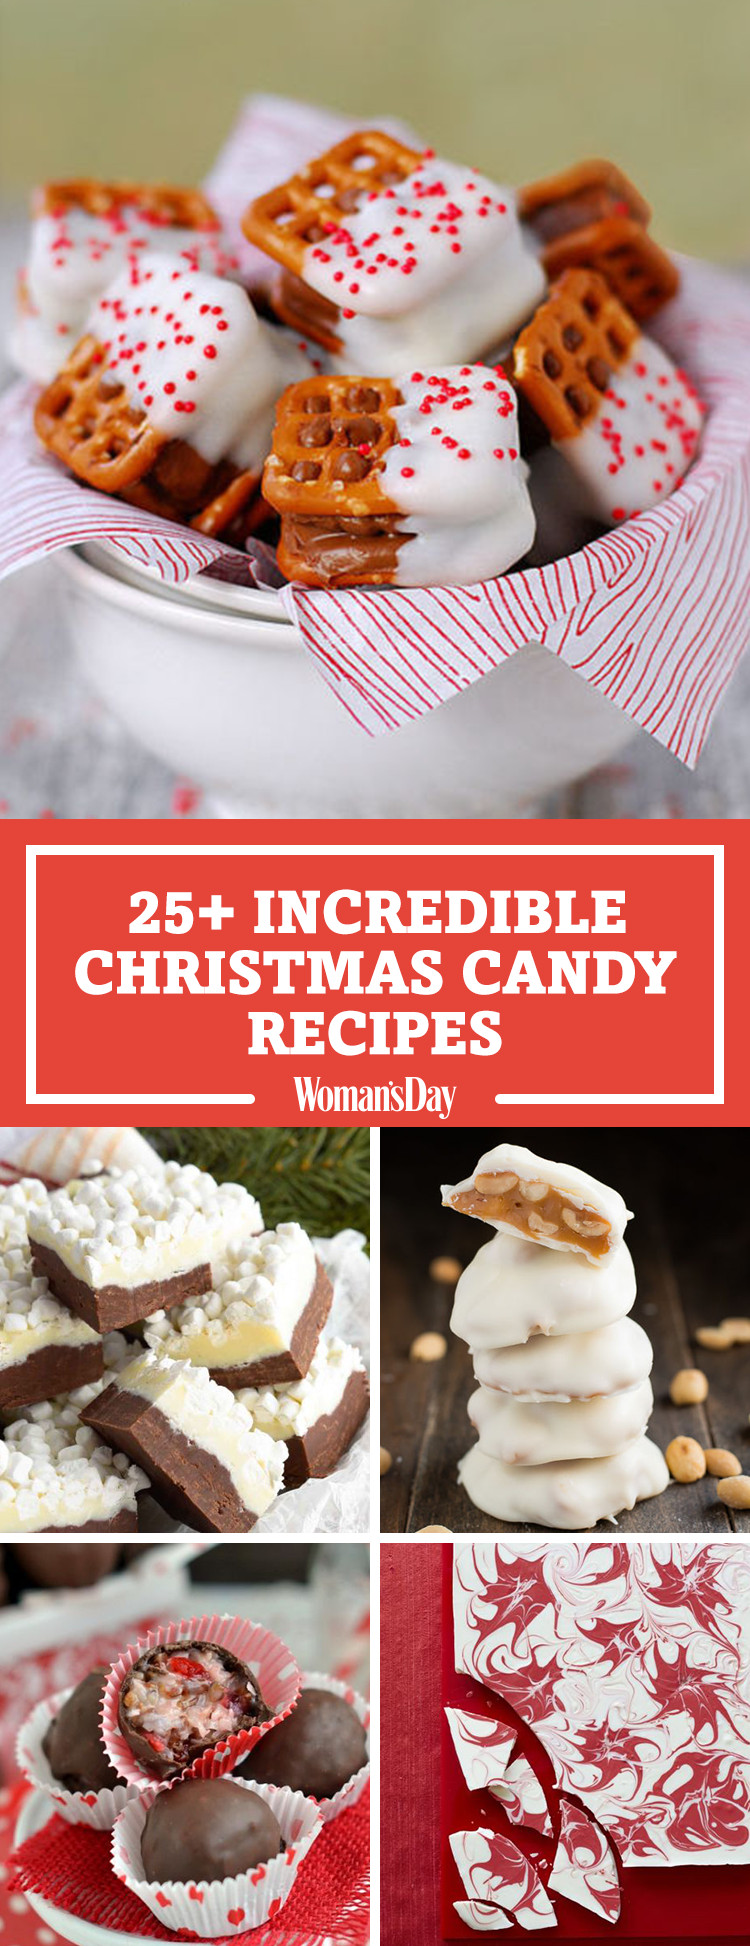 Candy Recipes For Christmas
 28 Homemade Christmas Candy Recipes How To Make Your Own